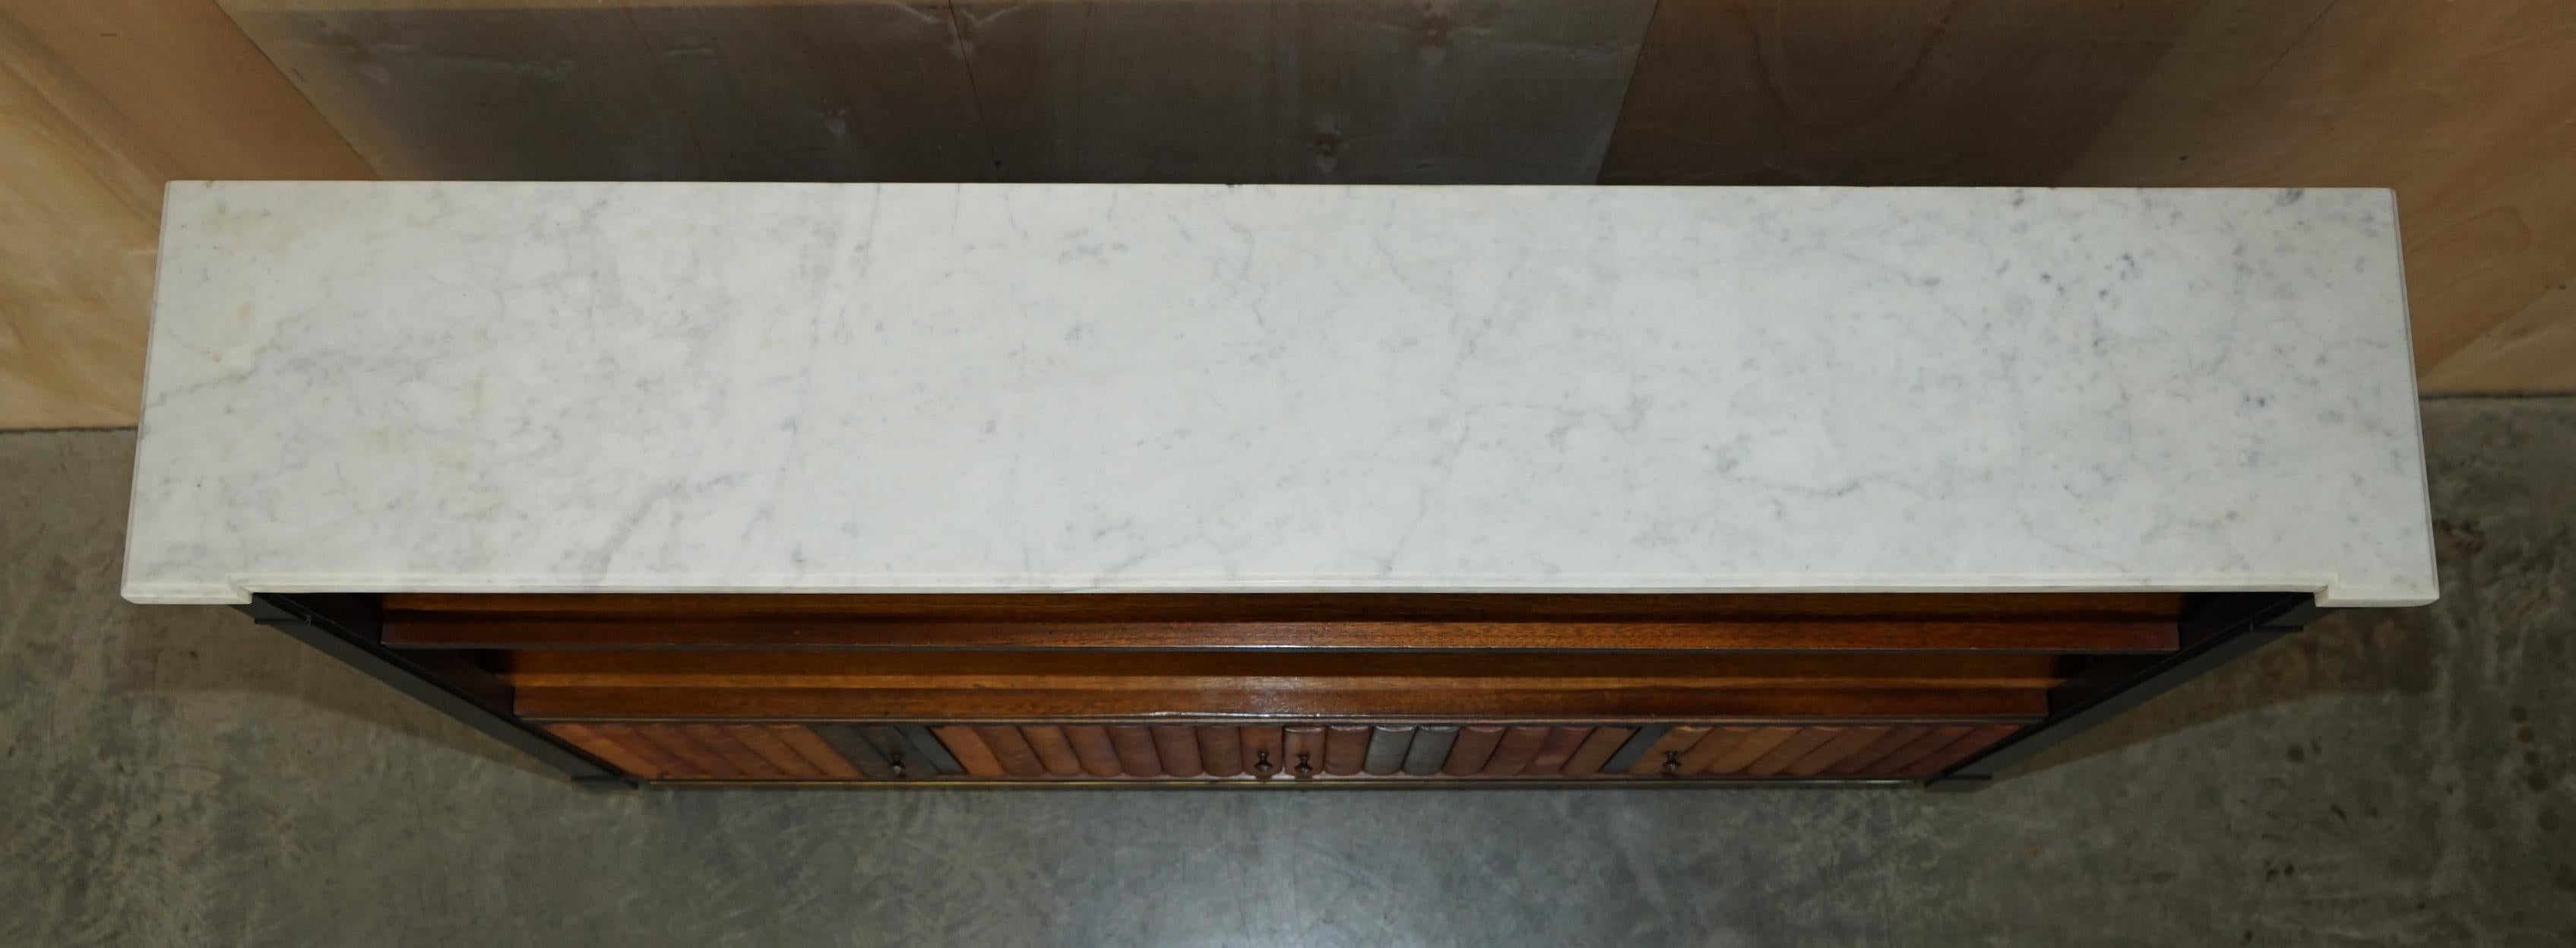 Circa 1880 Antique French Faux Book Front Sideboard Bookcase Italian Marble Top For Sale 4